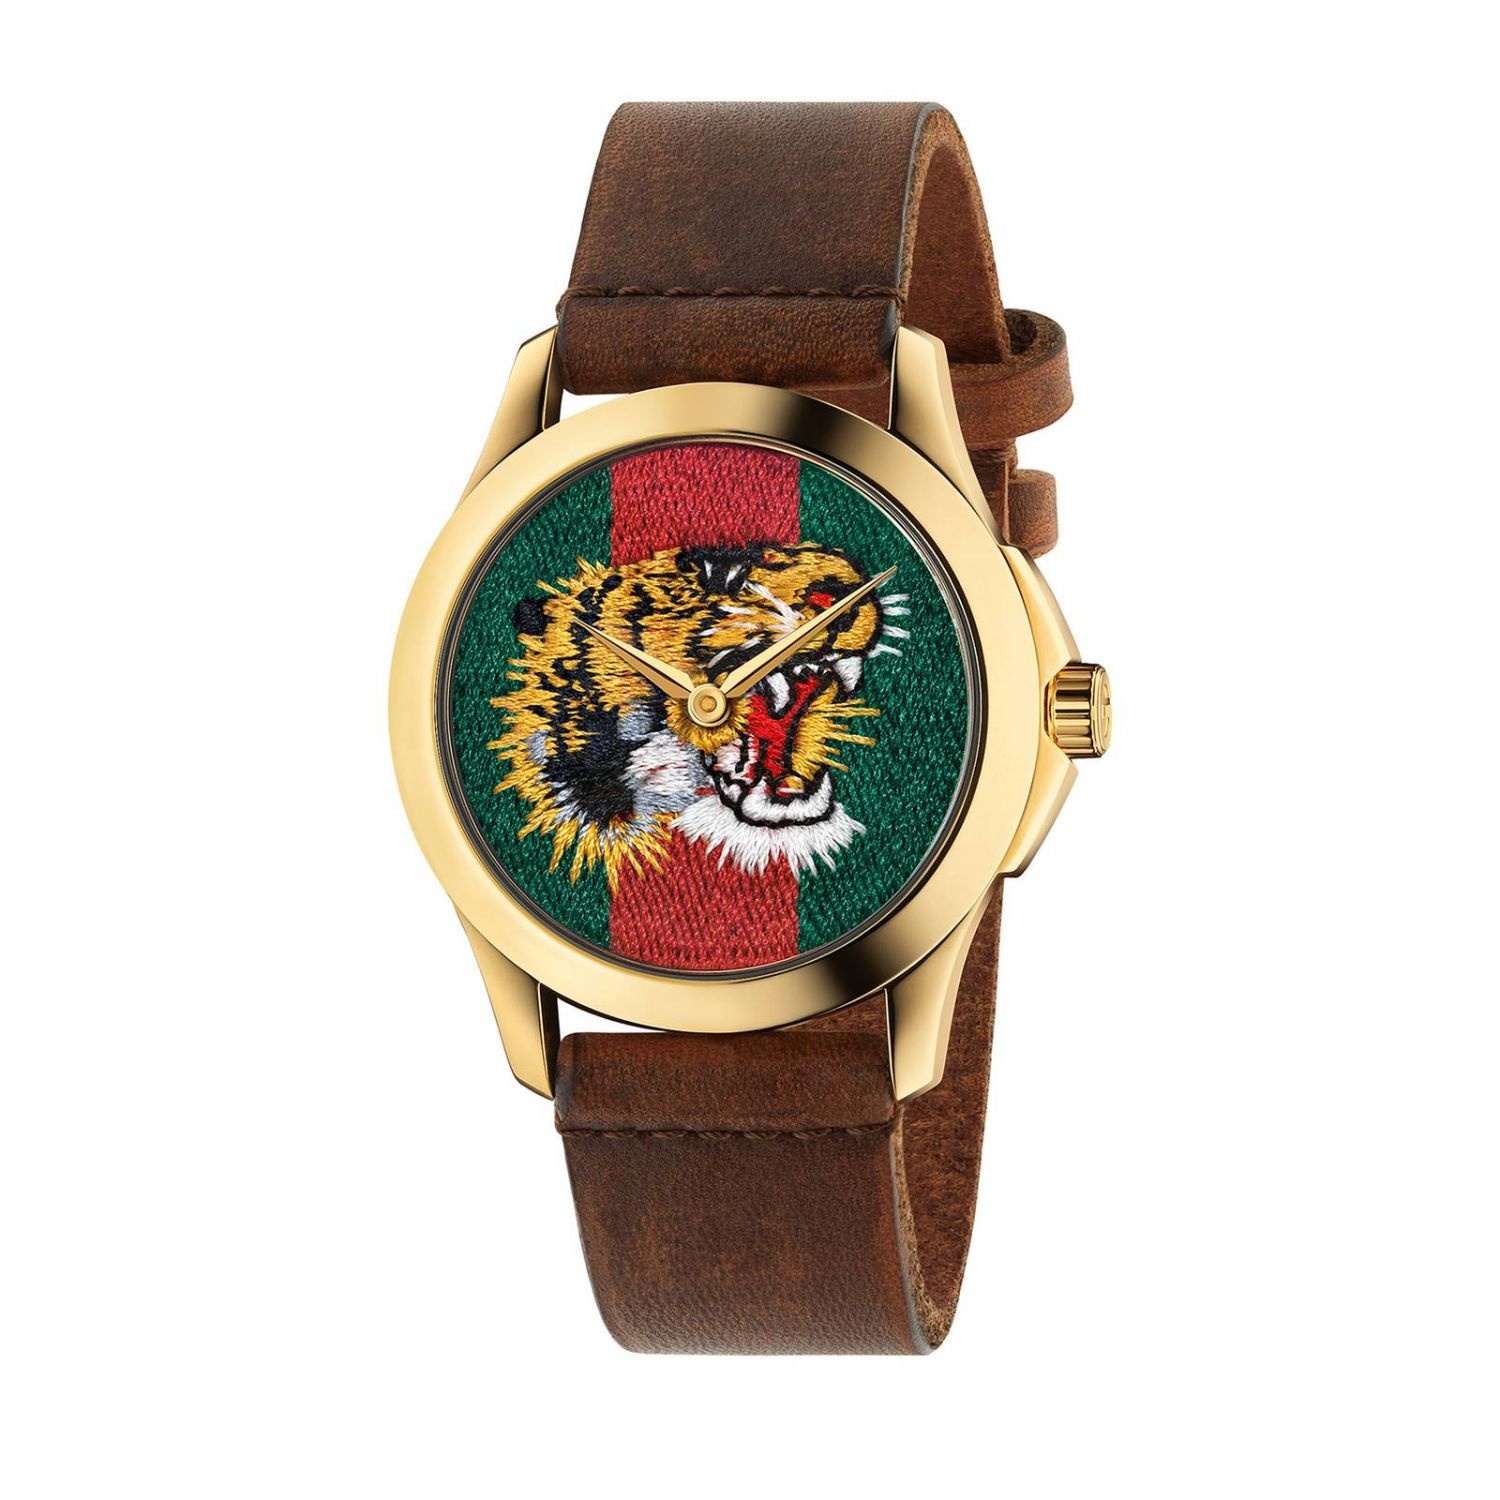 Le Marché des Merveilles watch 38mm case with Angry Cat pattern - 1